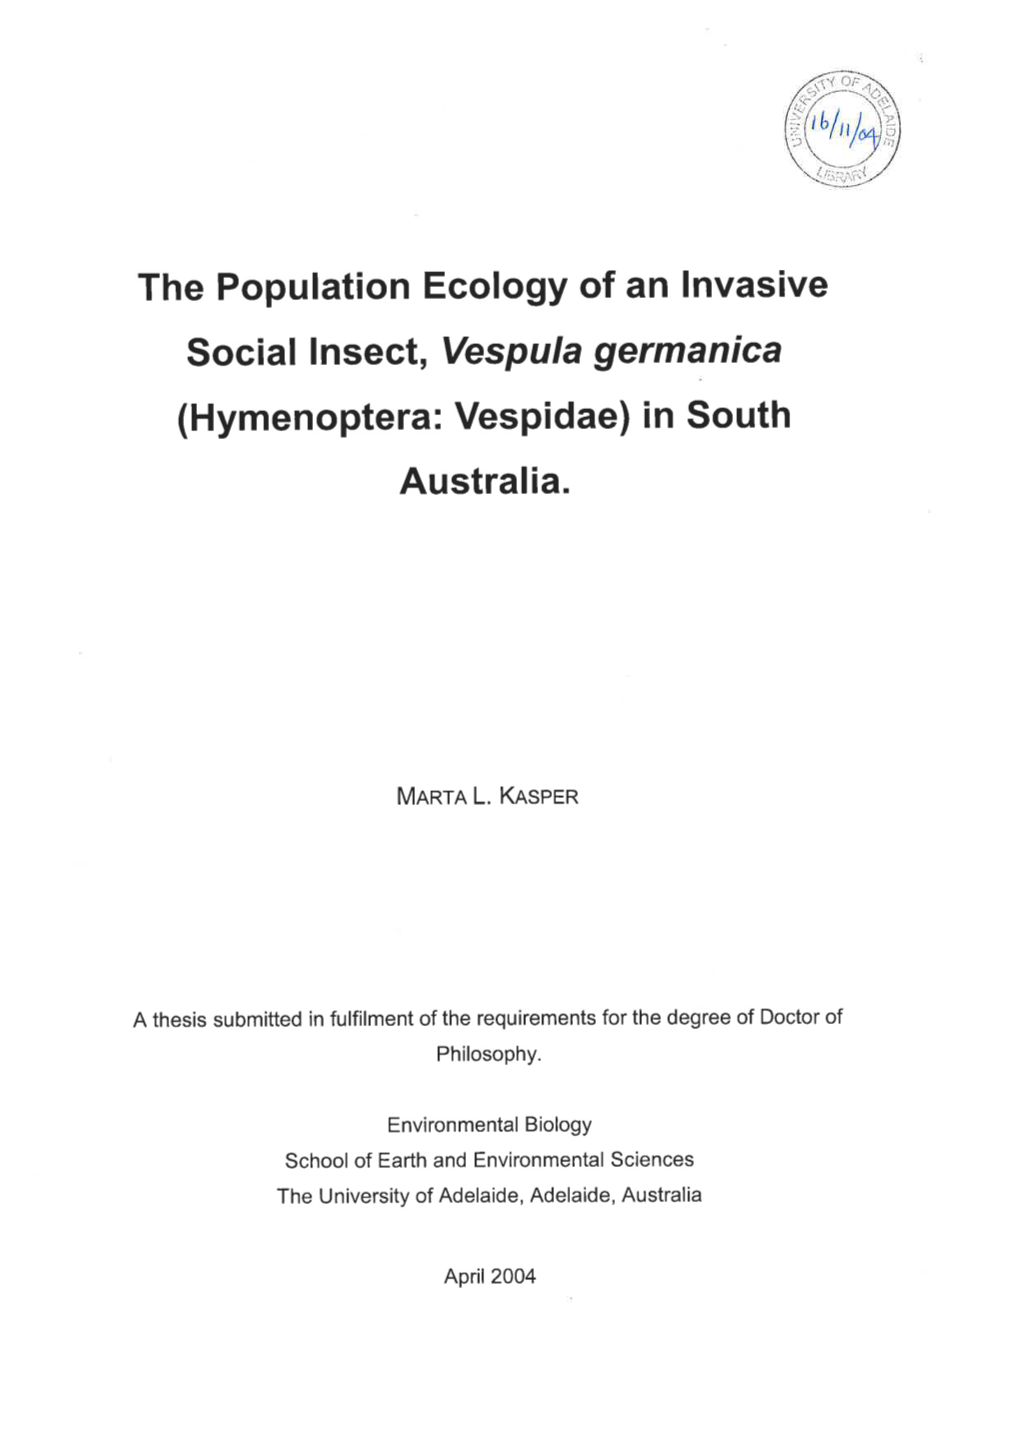 The Population Ecology of an Invasive Social Insect, Vespula Germanica (Hymenoptera: Vesp¡Dae) in South Australia